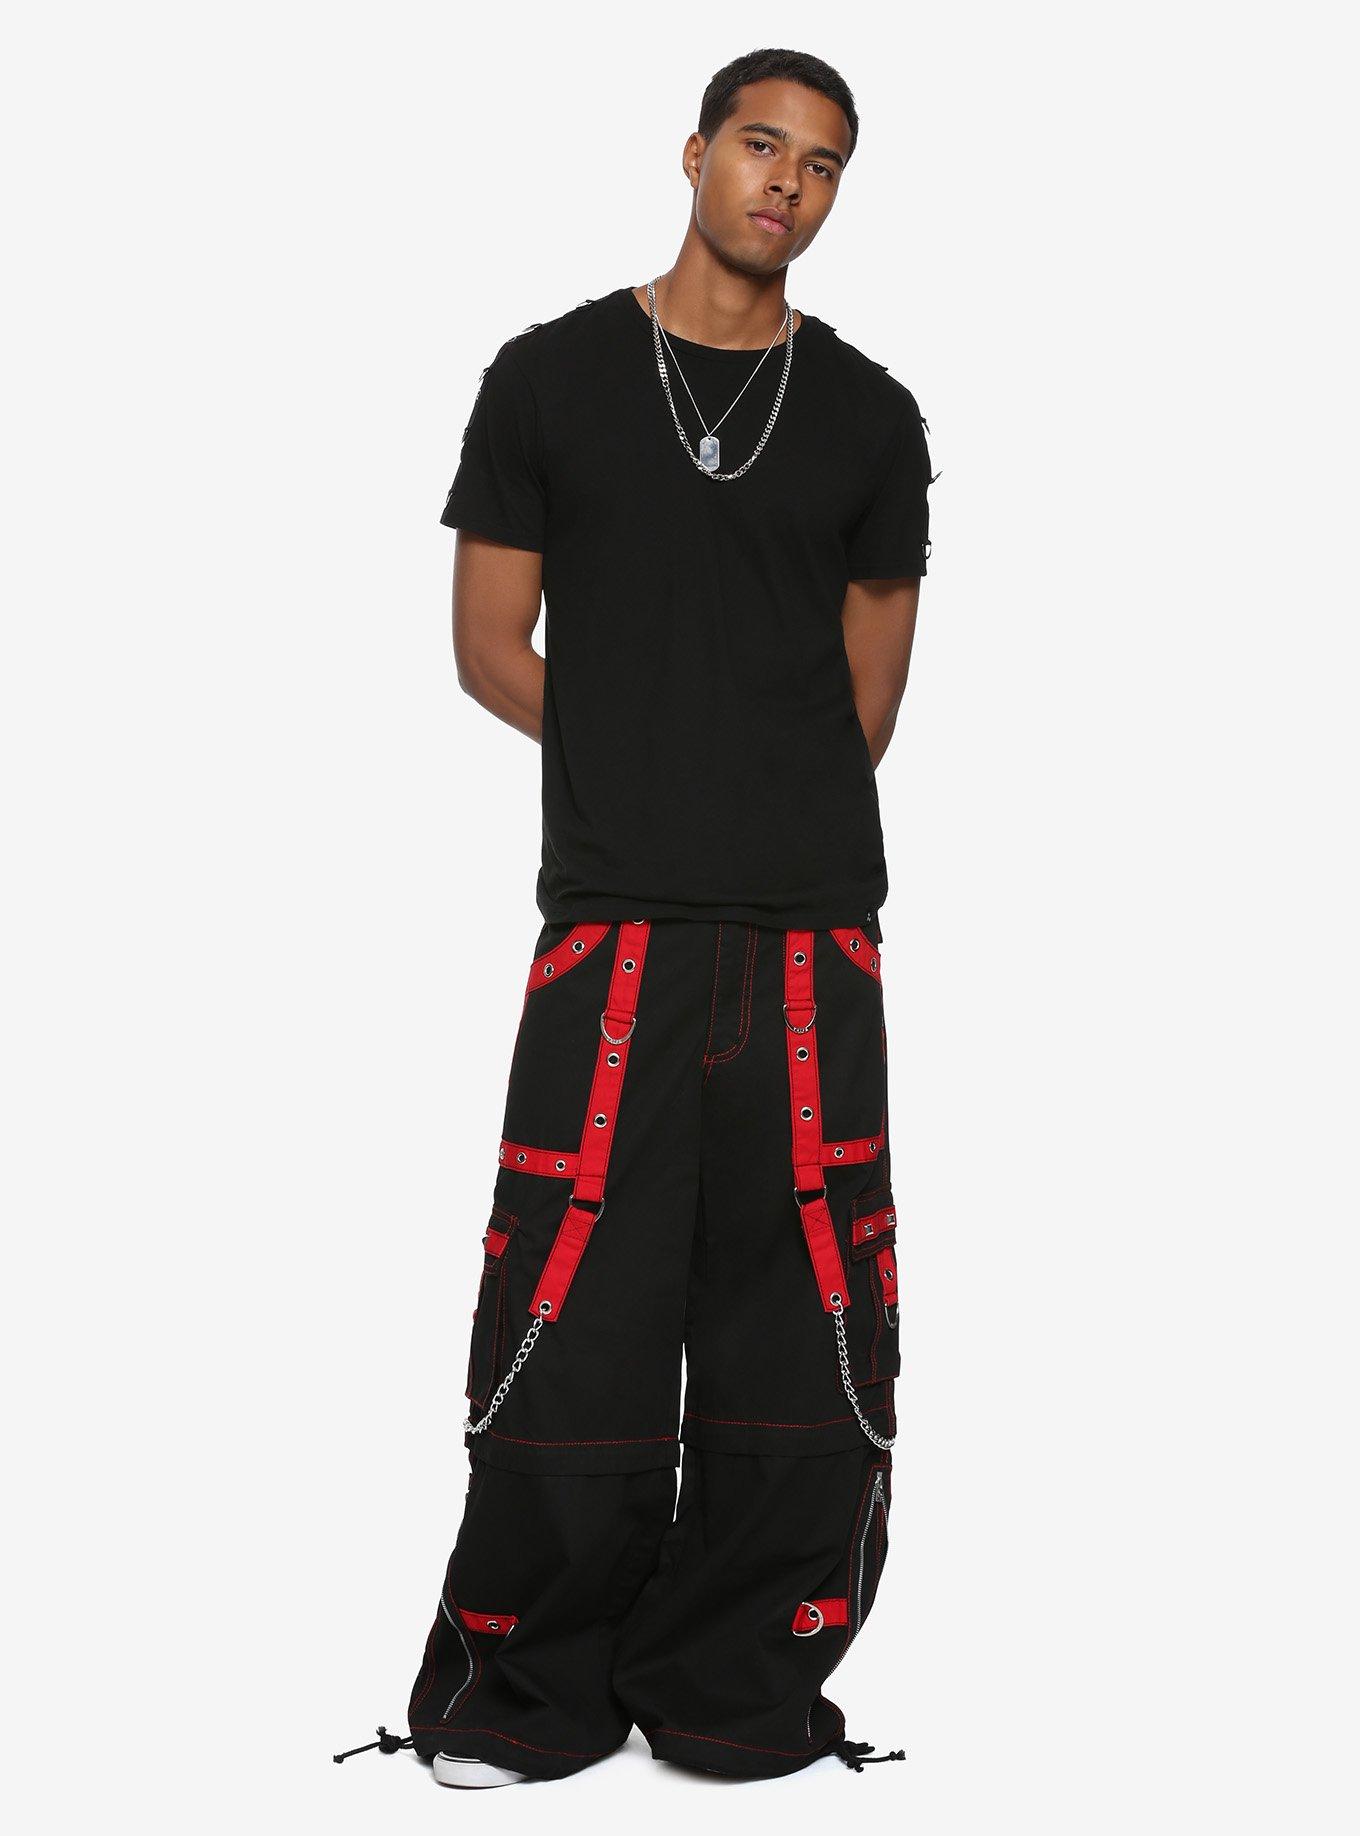 Forget Jncos. Hot-Topic Tripp chain pants were for the really cool